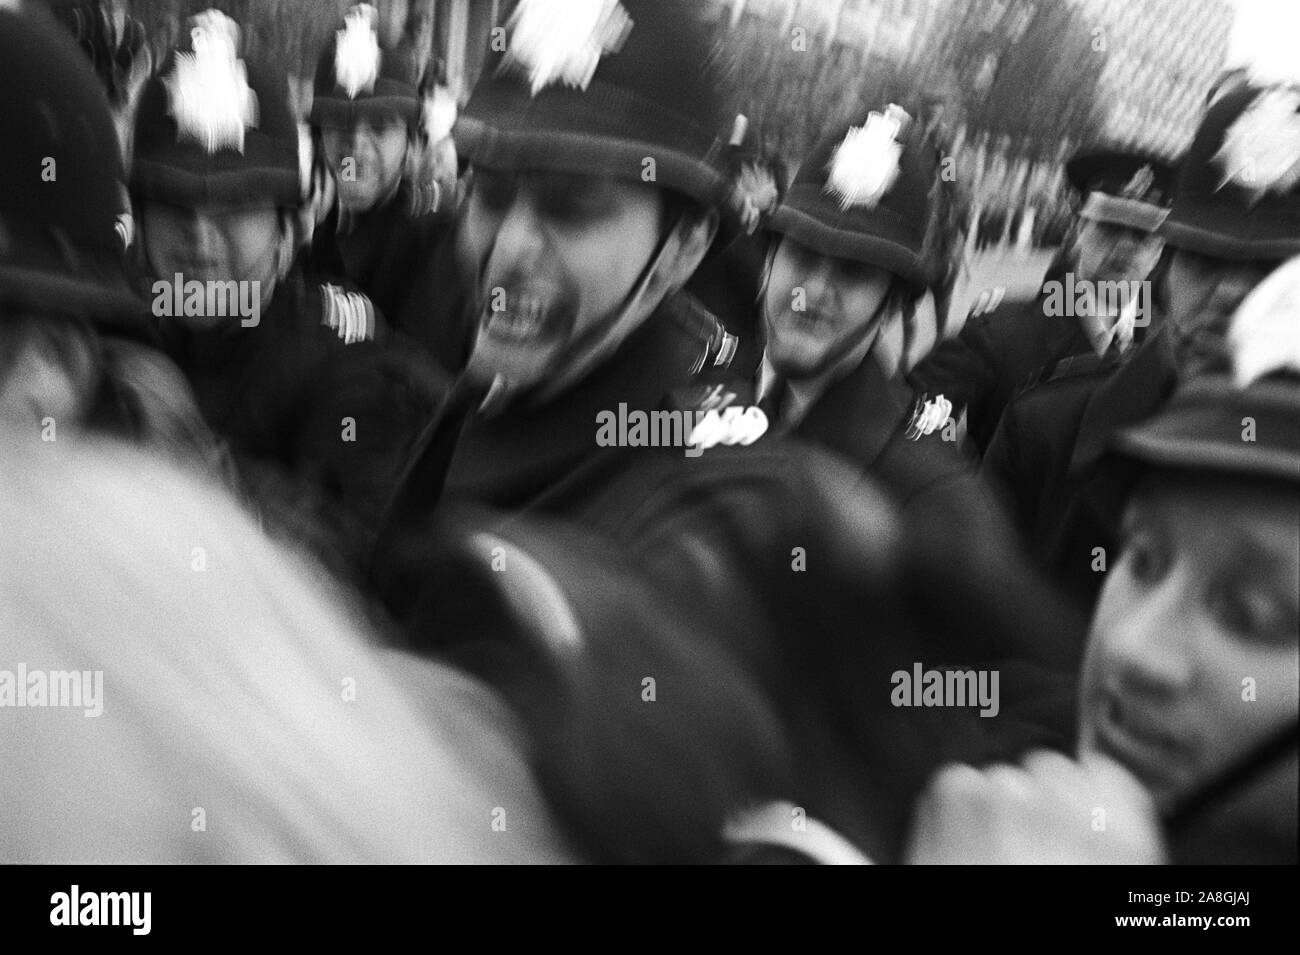 Police at the anti Vietnam war demonstration - The Grosvenor Square Riots - outside the American US Embassy, Grosvenor Square, London England. 17 March 1968.1960s UK  Policemen grabbing at a demonstrator. HOMER SYKES Stock Photo